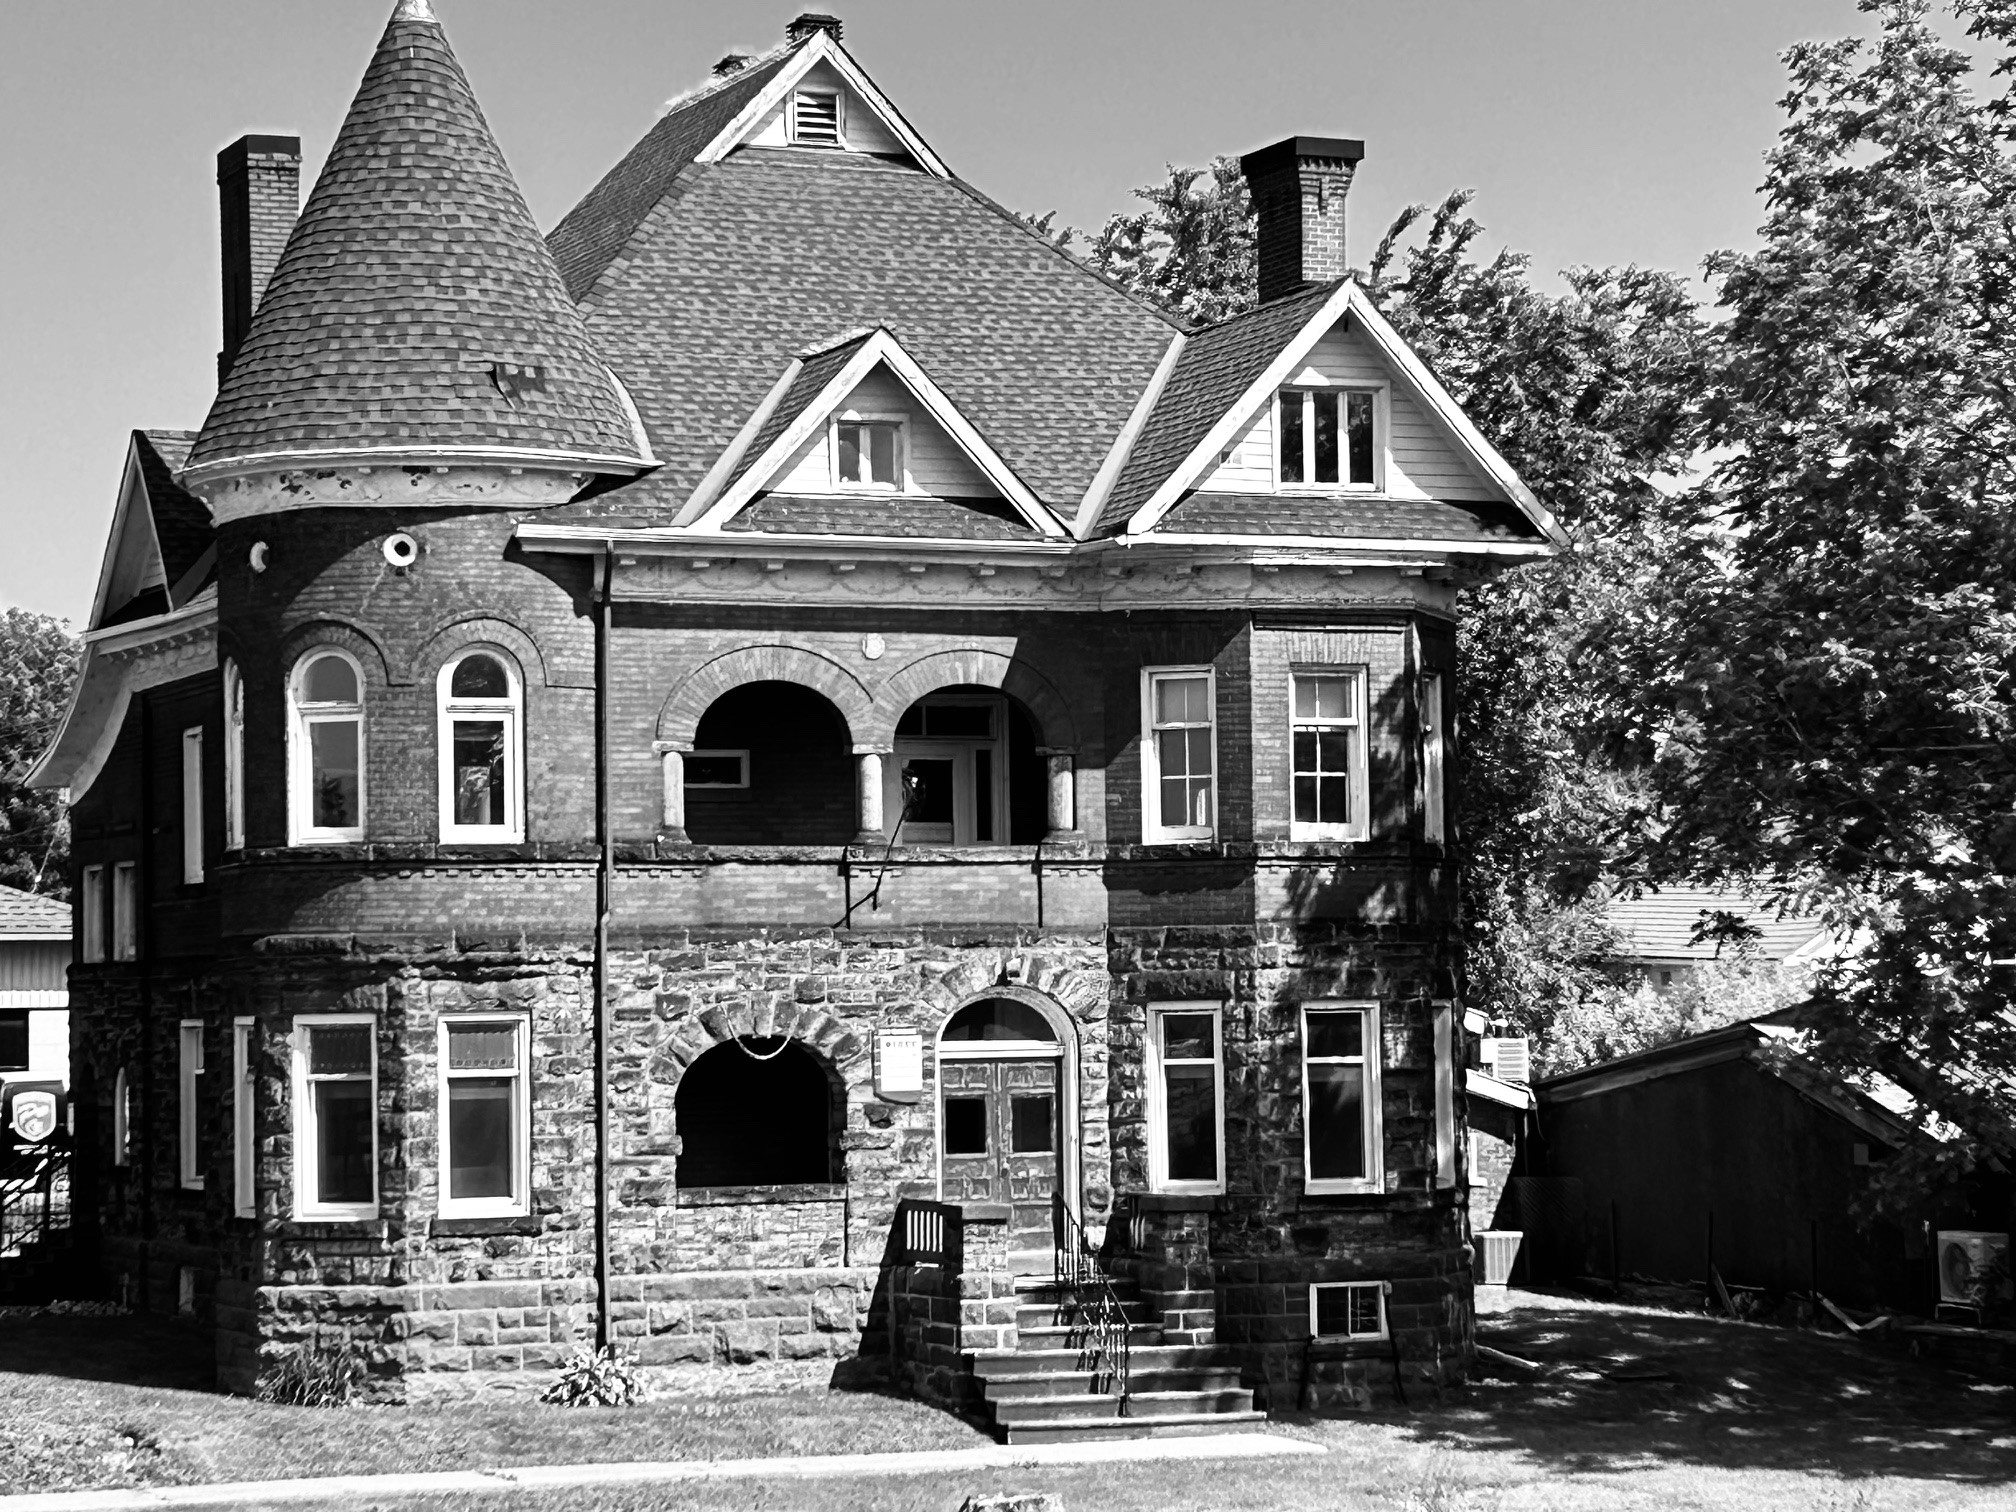 Image of a large heritage building in black and white